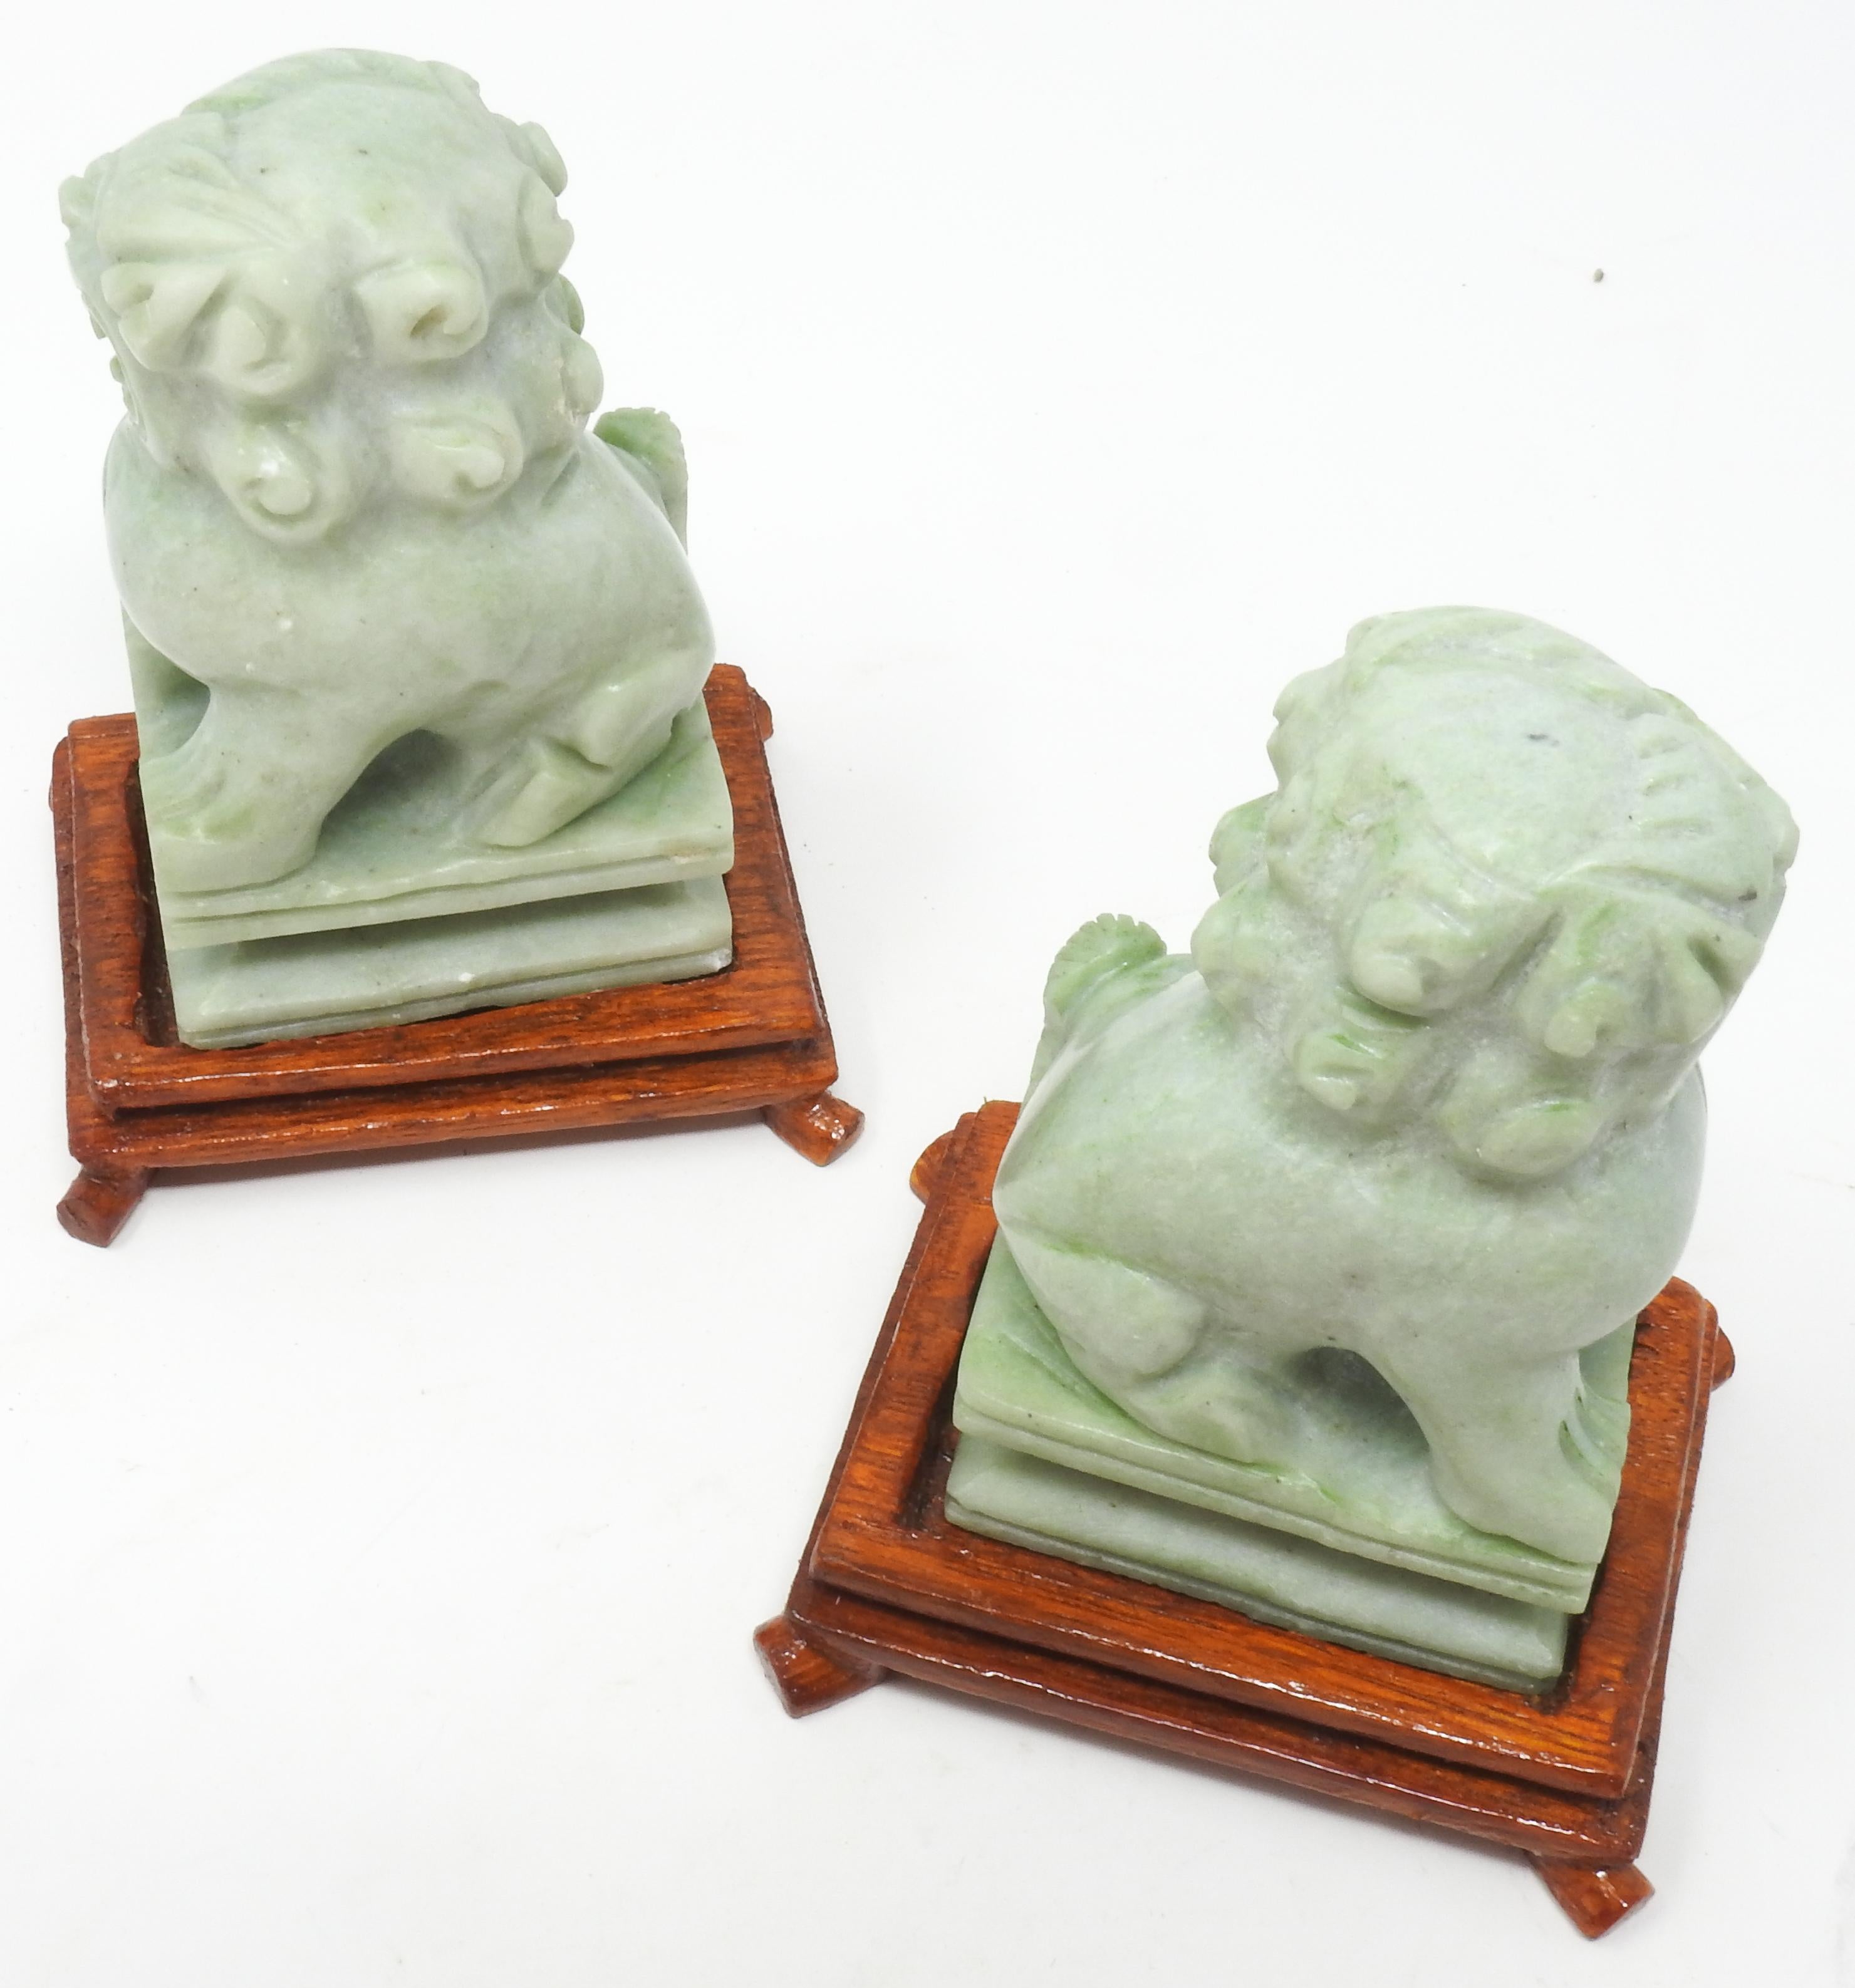 Offering this magnificent pair of Jadeite guardian foo dogs. They are a small simple pair done in the mid-20th century. The small wooden bases were hand carved. The foo dogs sit atop a plinth with simple lines and curves.